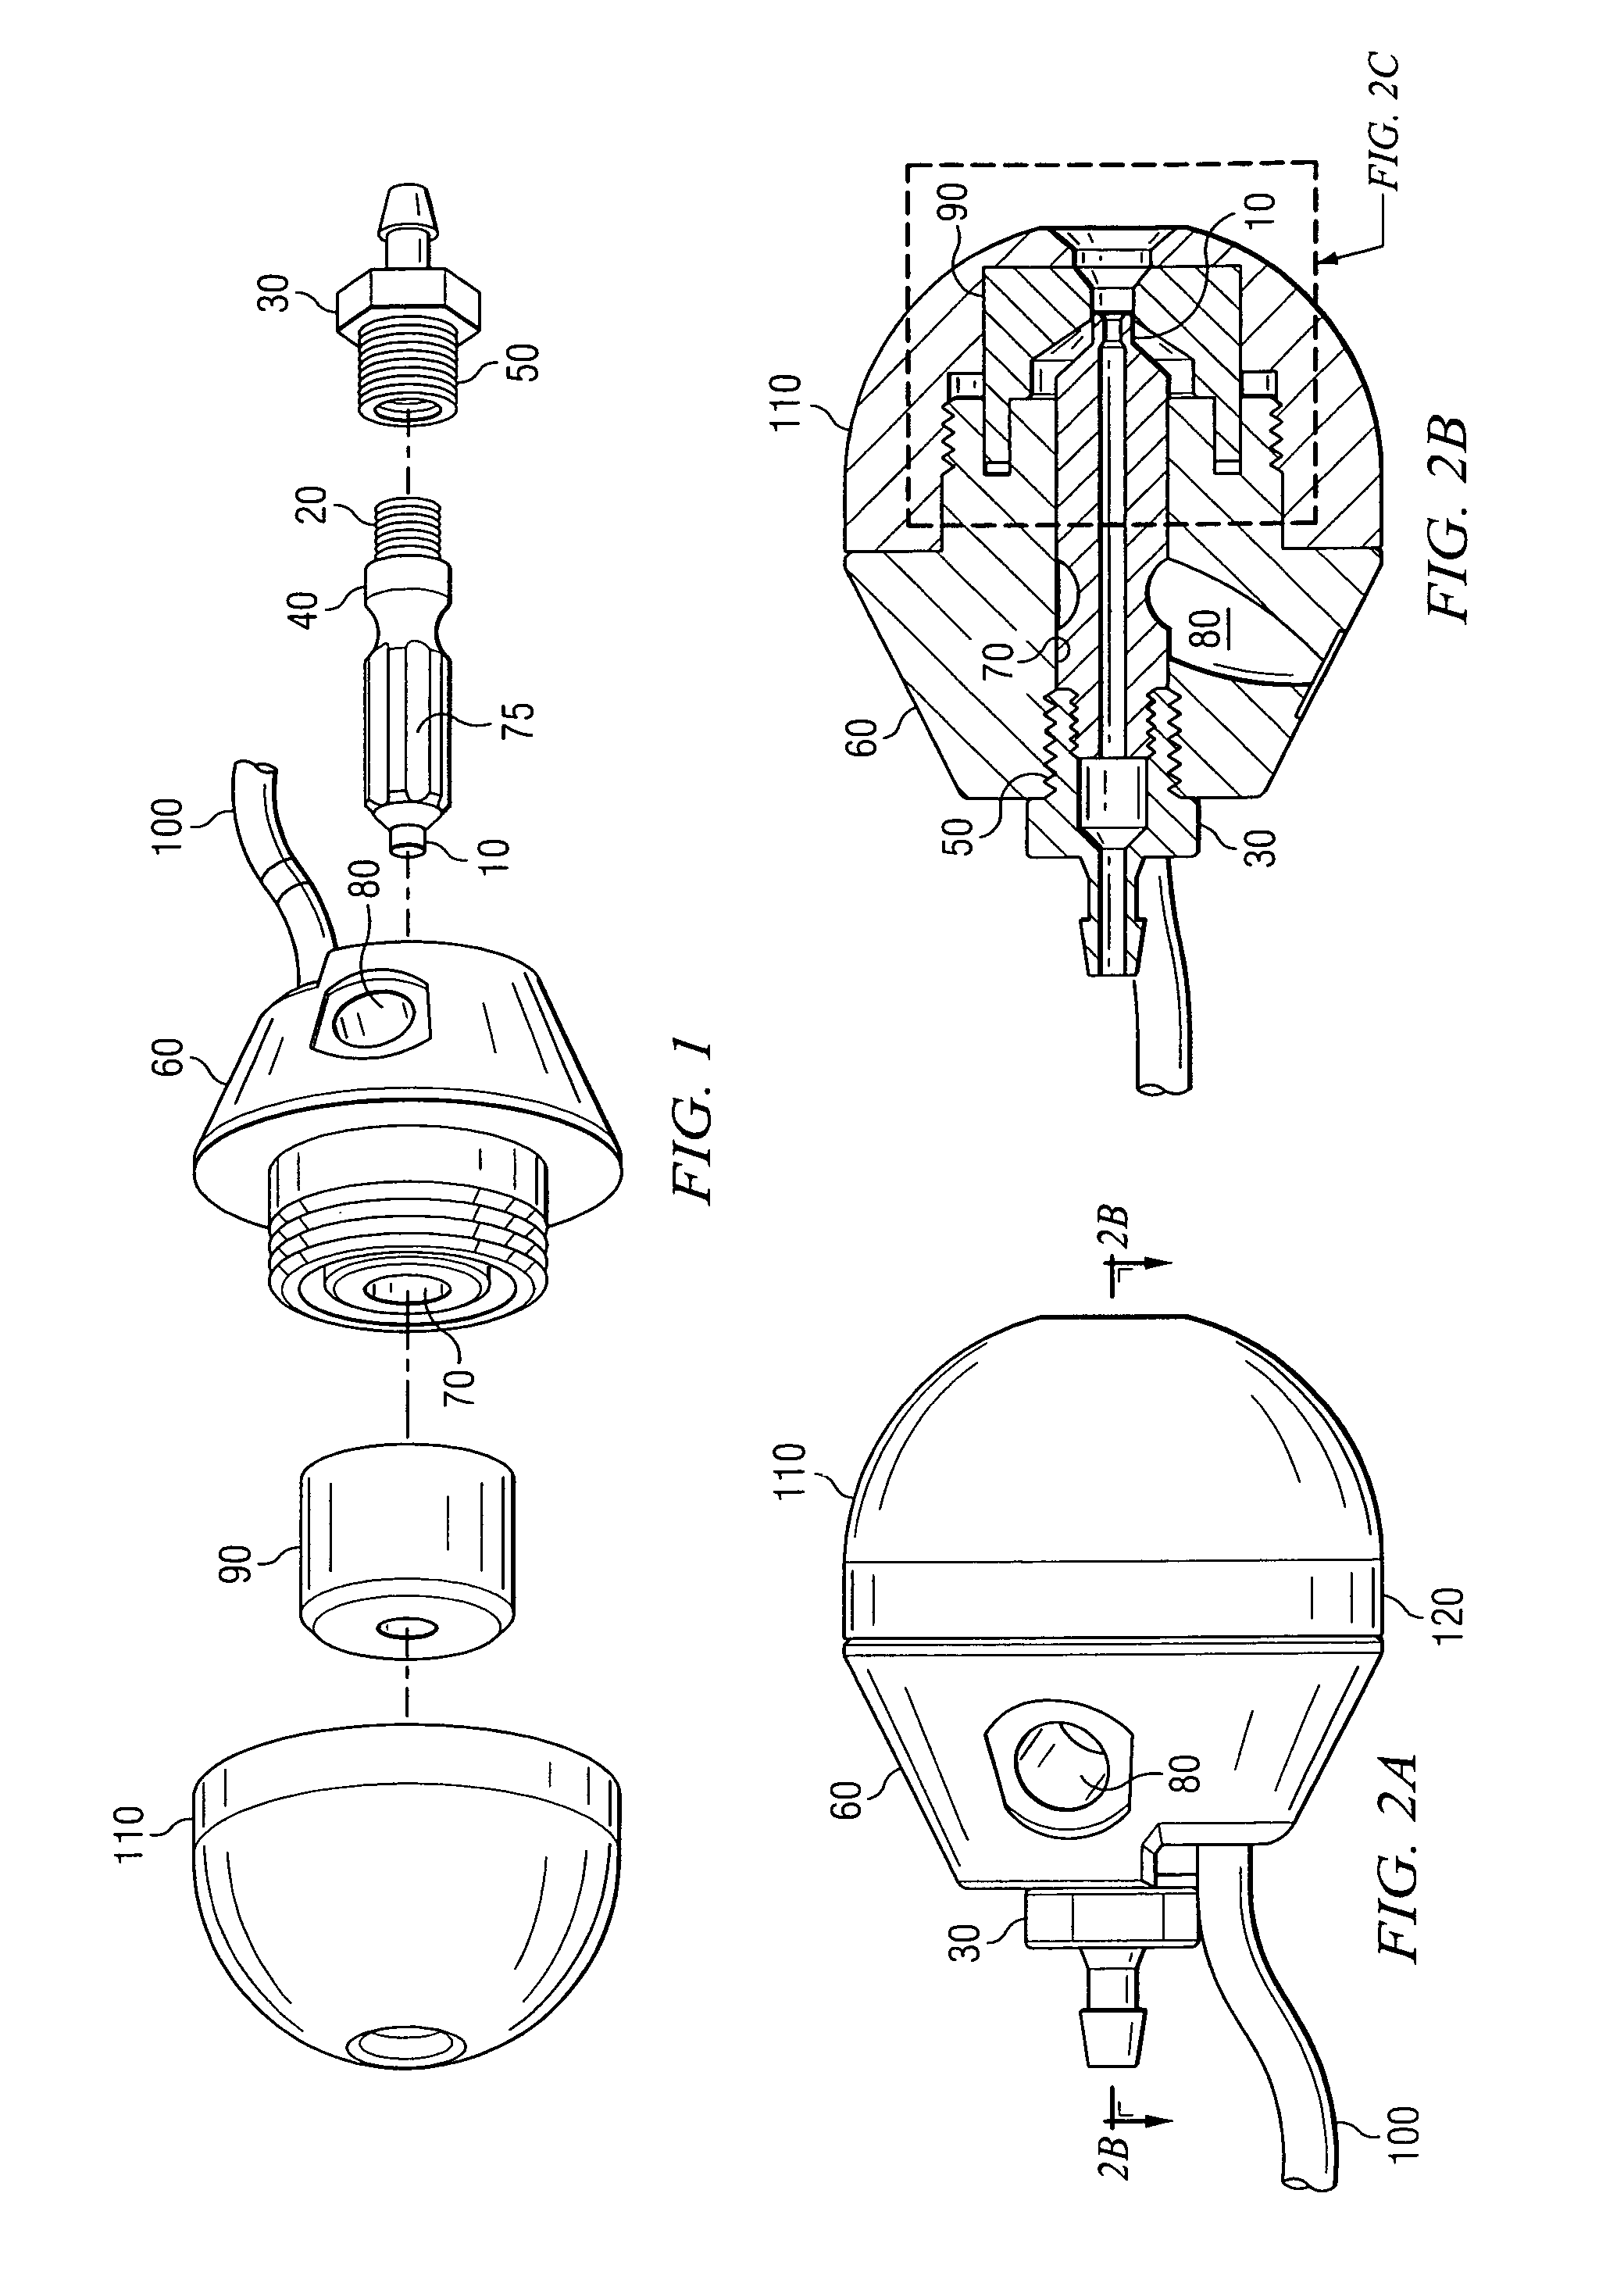 Electrostatic spray nozzle with adjustable fluid tip and interchangeable components